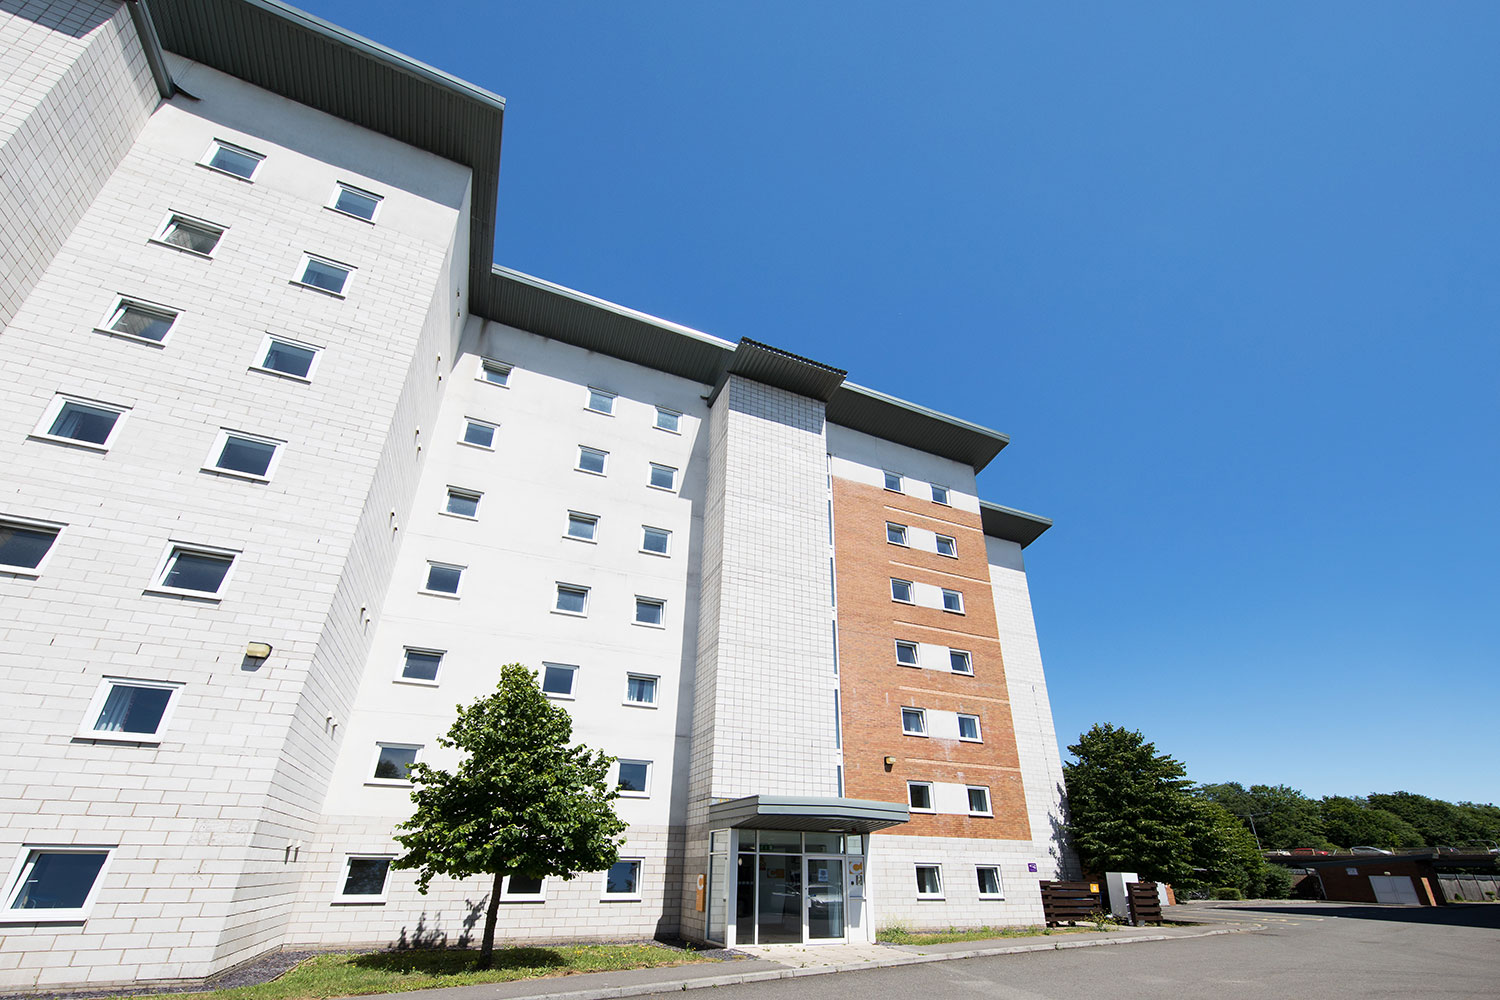 Unite Students accommodation at Clodien House in Cardiff